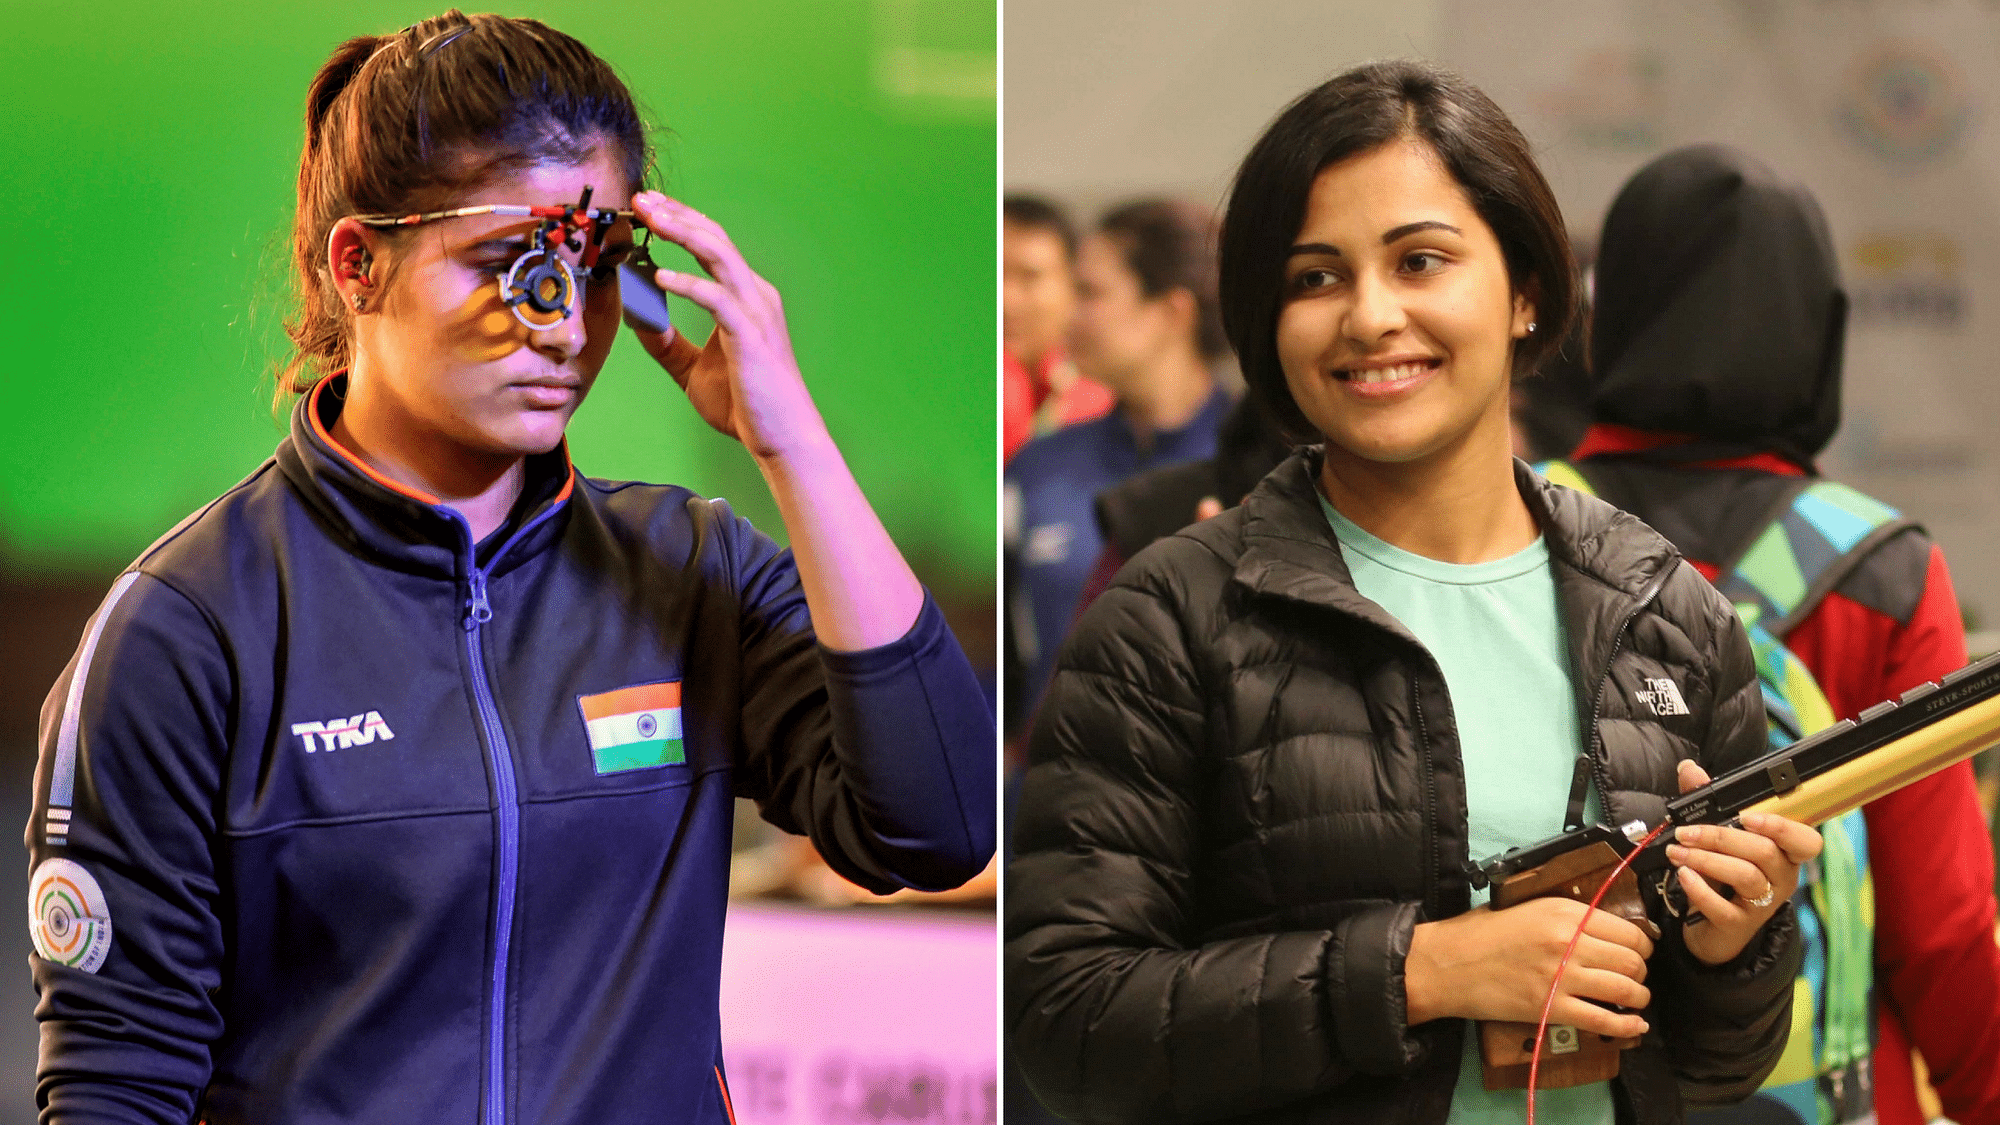 Heena Sidhu and Manu Bhaker have failed to qualify for the final of the 10m air pistol final at the ISSF World Cup in New Delhi.